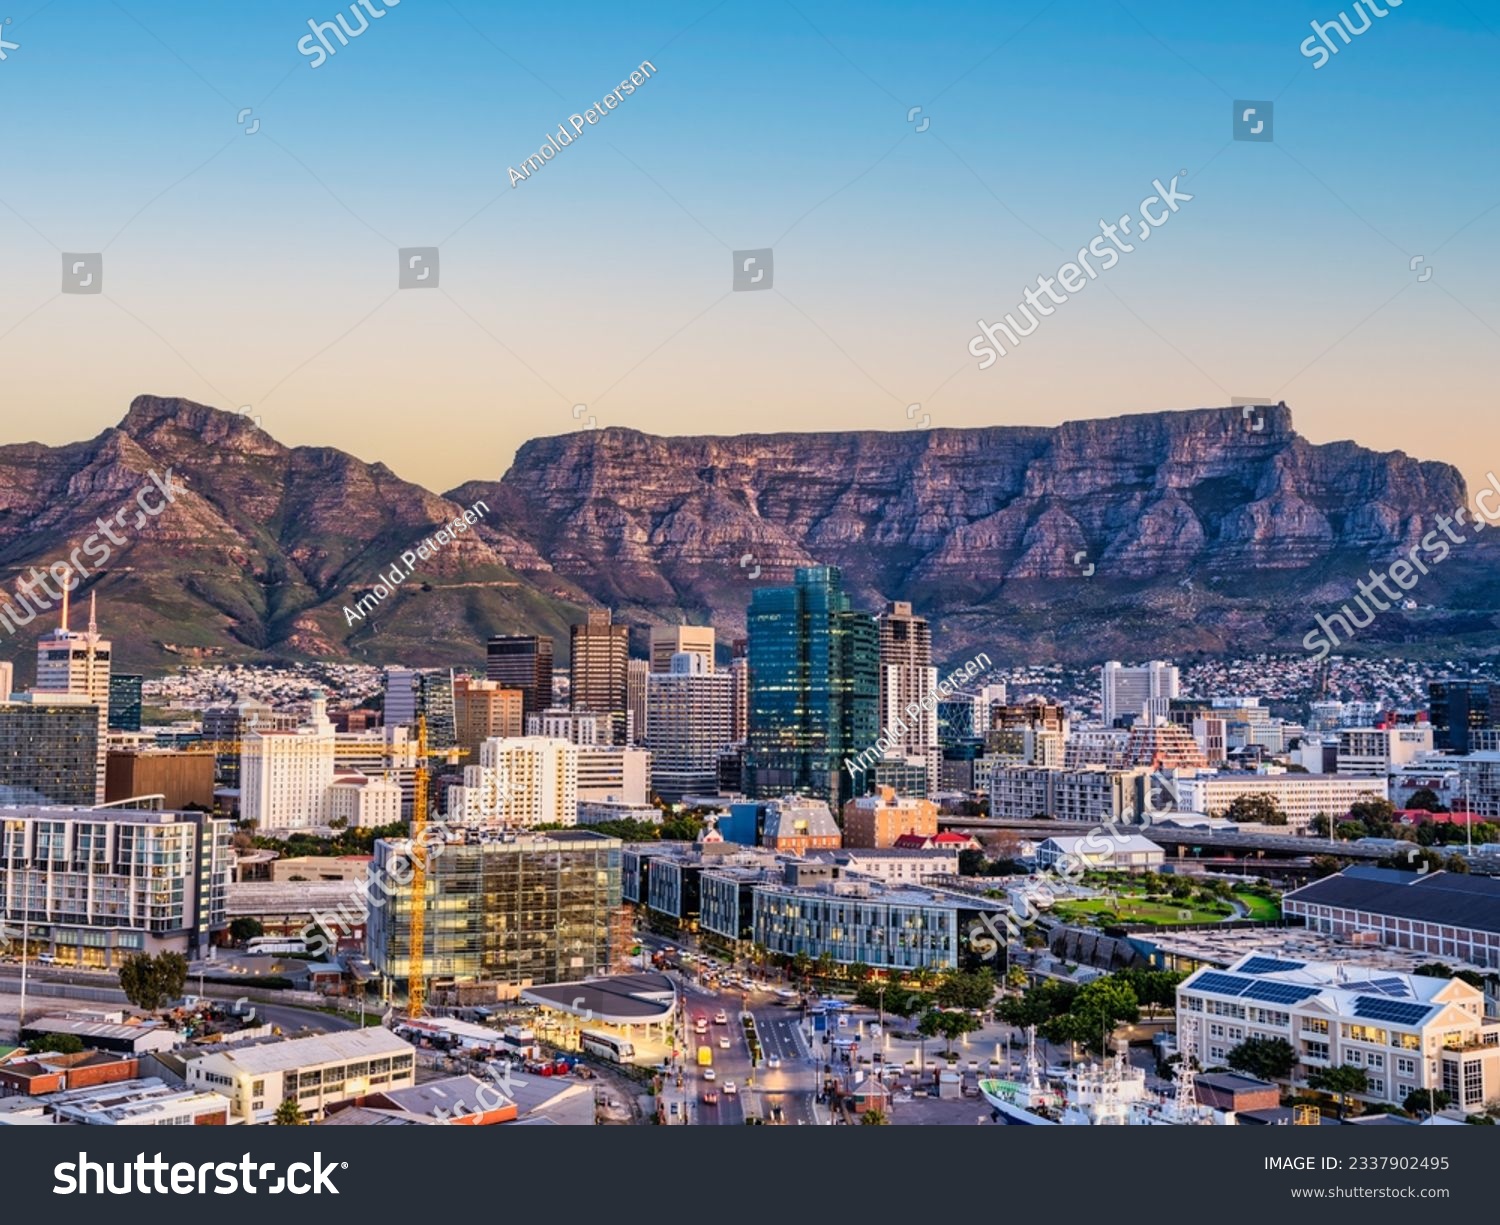 Cape Town city CBD and table mountain in the background during sunset, South Africa #2337902495